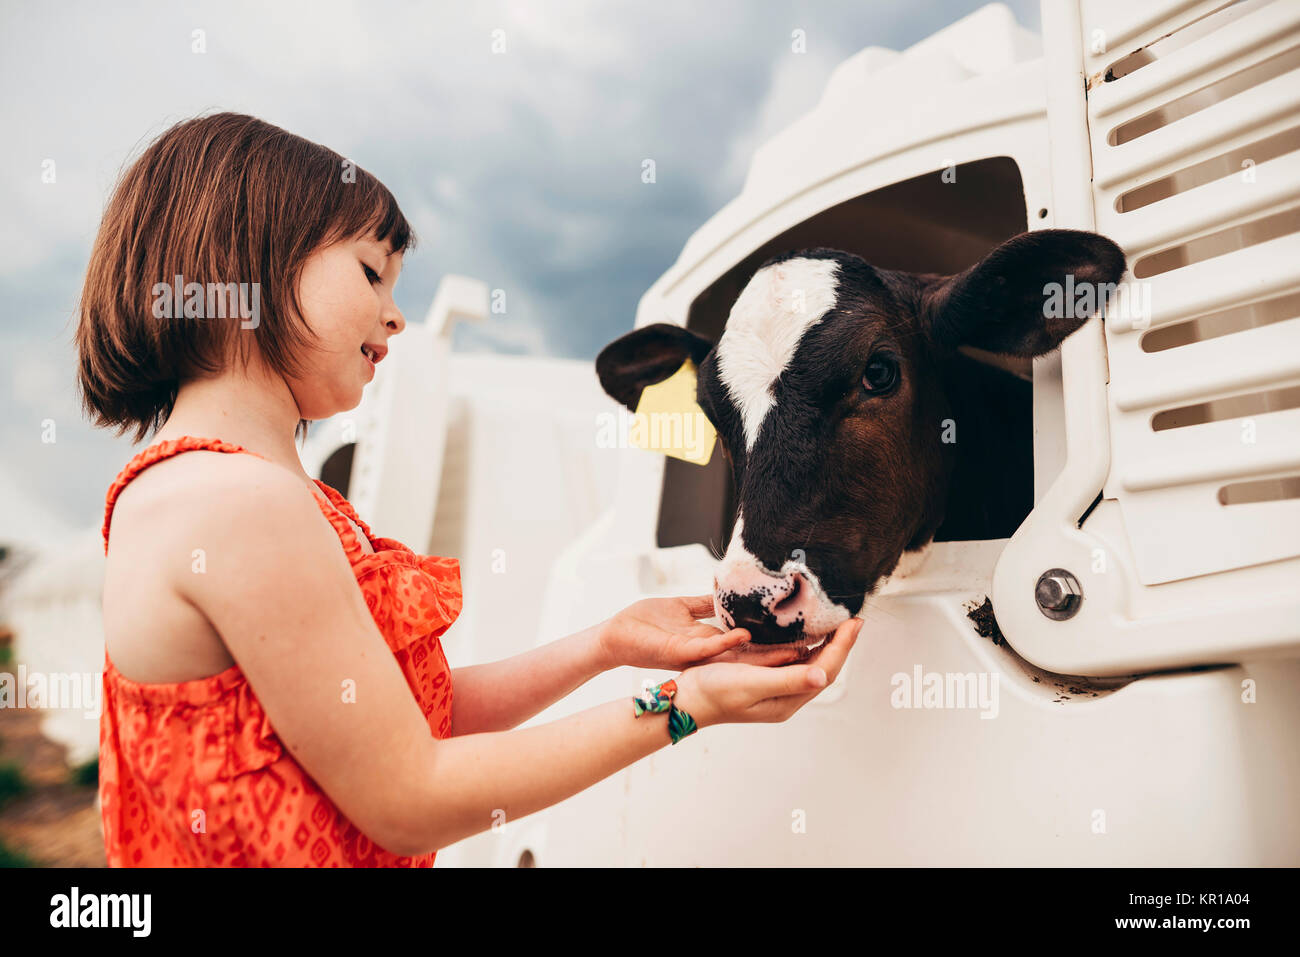 Young girl feeding baby cow in a calf hutch Stock Photo